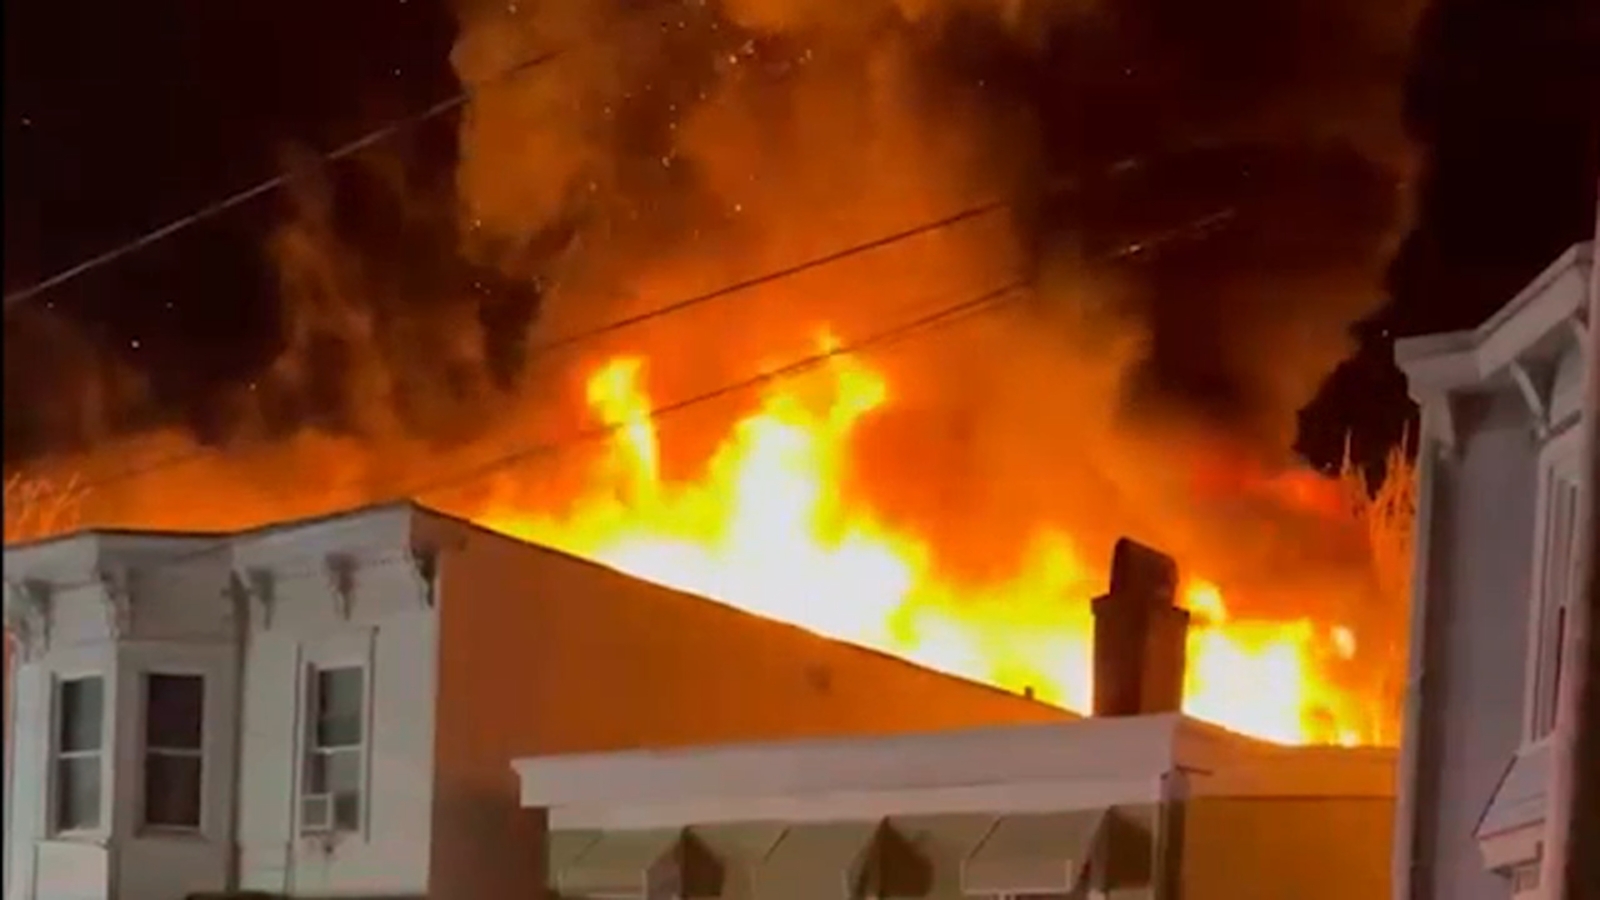 Fire rips through buildings in Newburgh, Orange County; young child alerts family [Video]